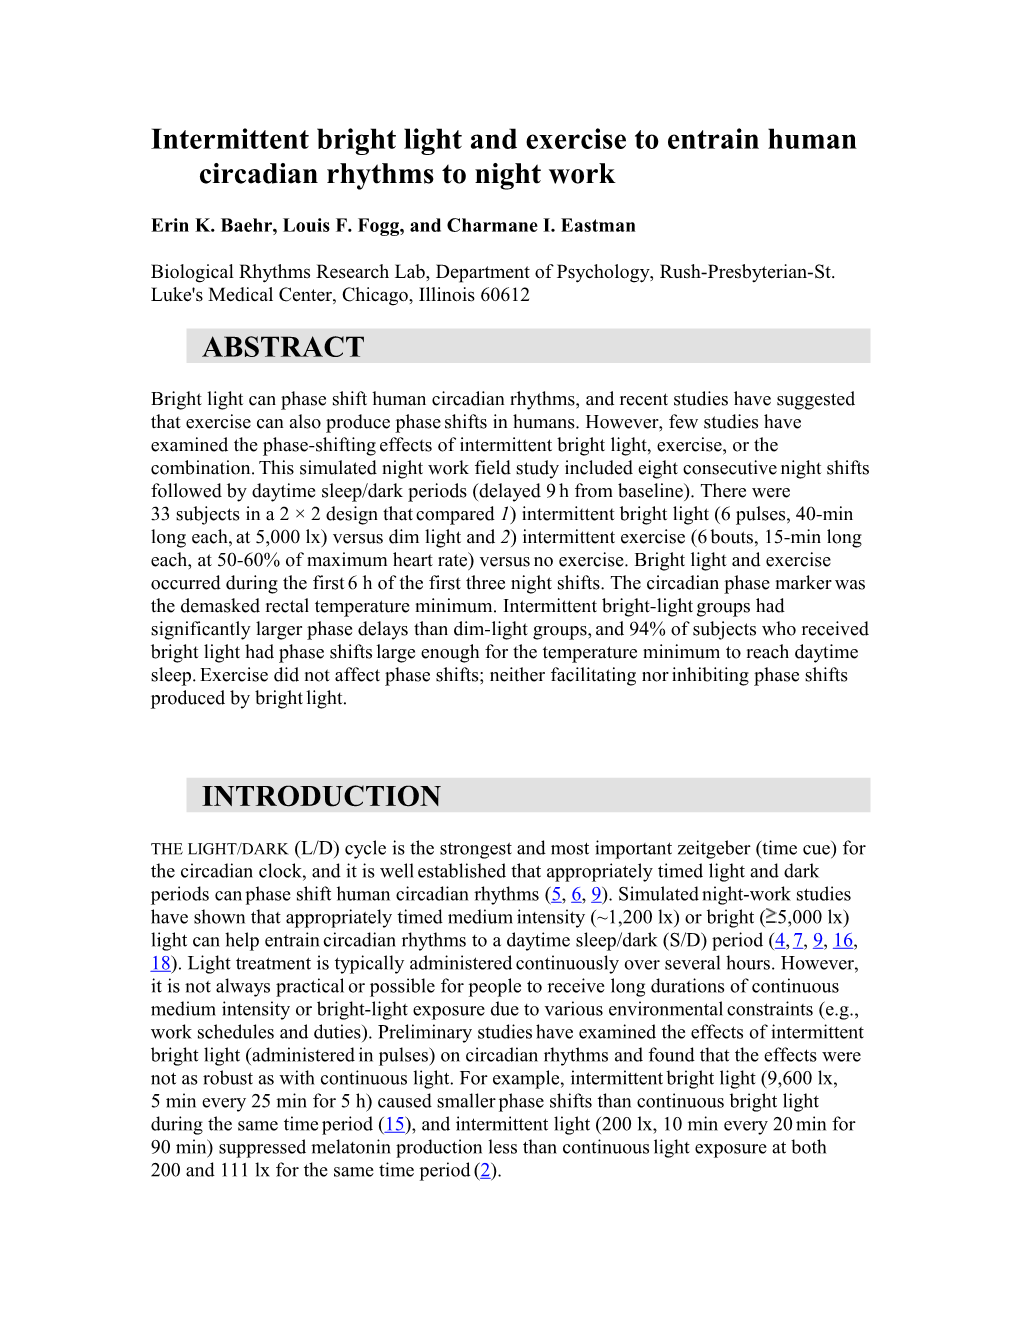 Intermittent Bright Light and Exercise to Entrain Human Circadian Rhythms to Night Work